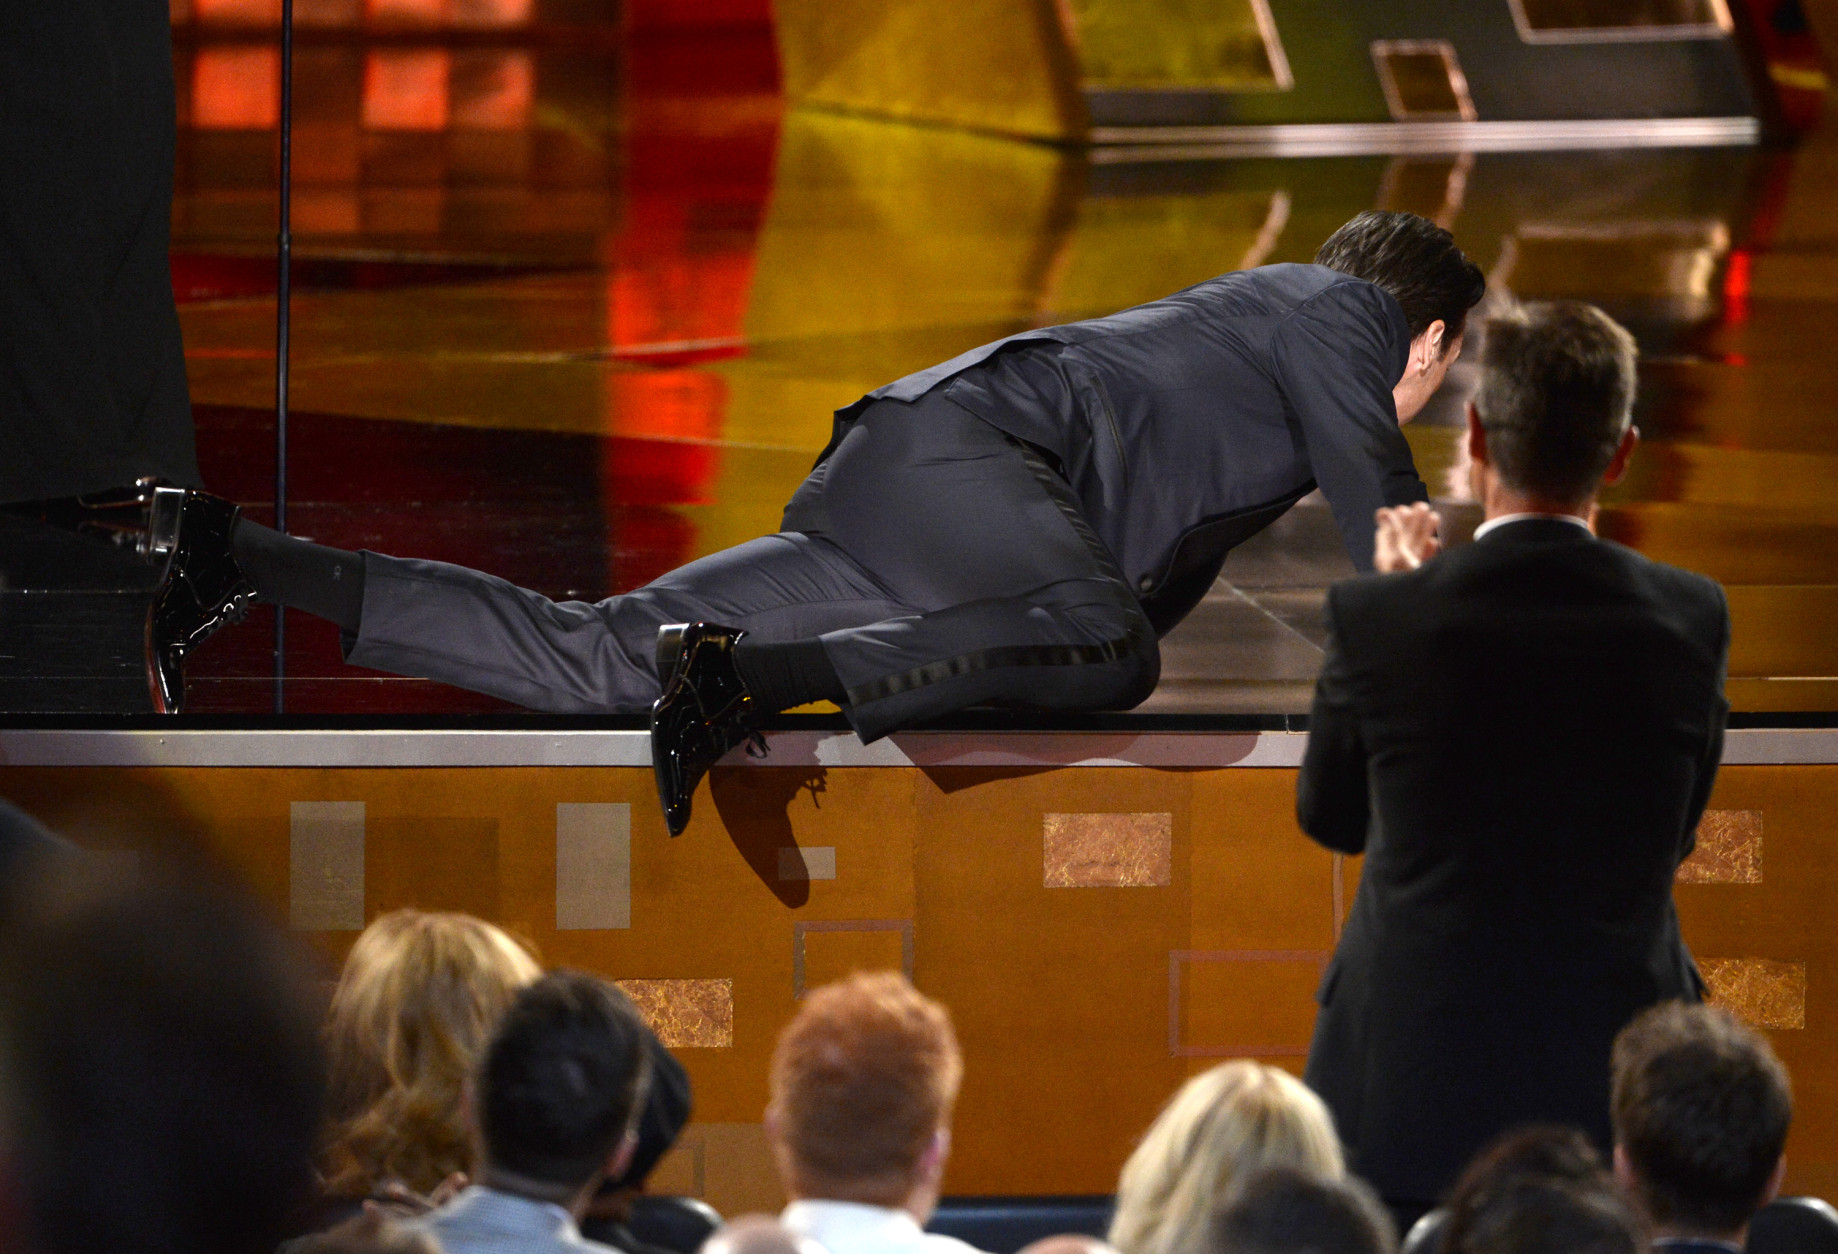 Jon Hamm crawls on stage to accept the award for outstanding lead actor in a drama series for Mad Men at the 67th Primetime Emmy Awards on Sunday, Sept. 20, 2015, at the Microsoft Theater in Los Angeles. (Photo by Phil McCarten/Invision for the Television Academy/AP Images)